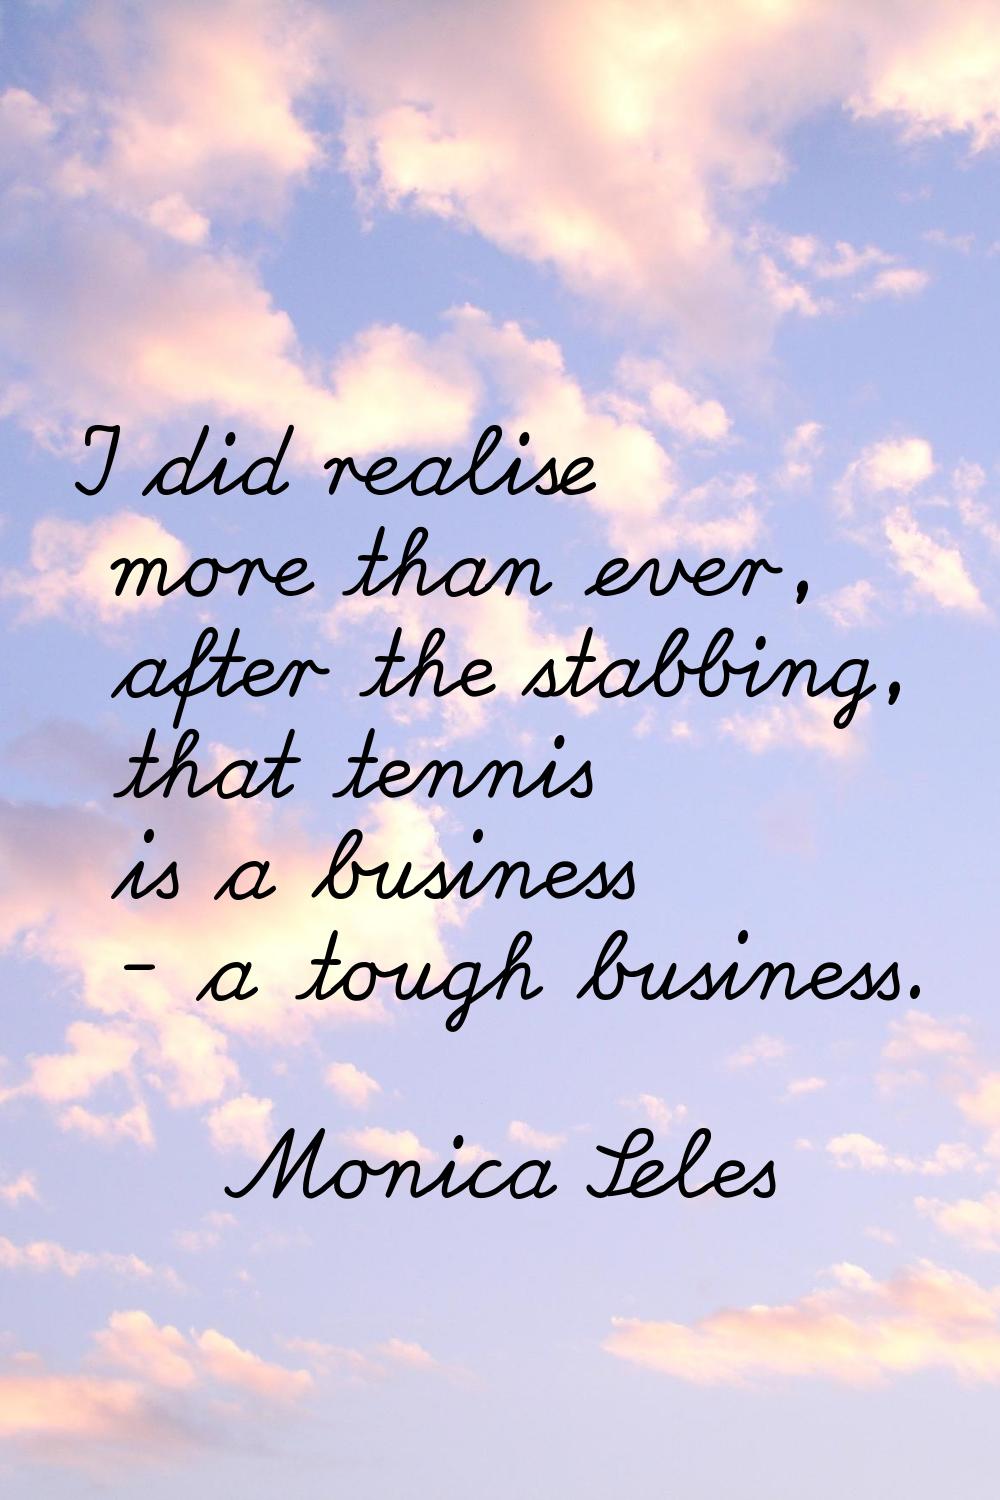 I did realise more than ever, after the stabbing, that tennis is a business - a tough business.